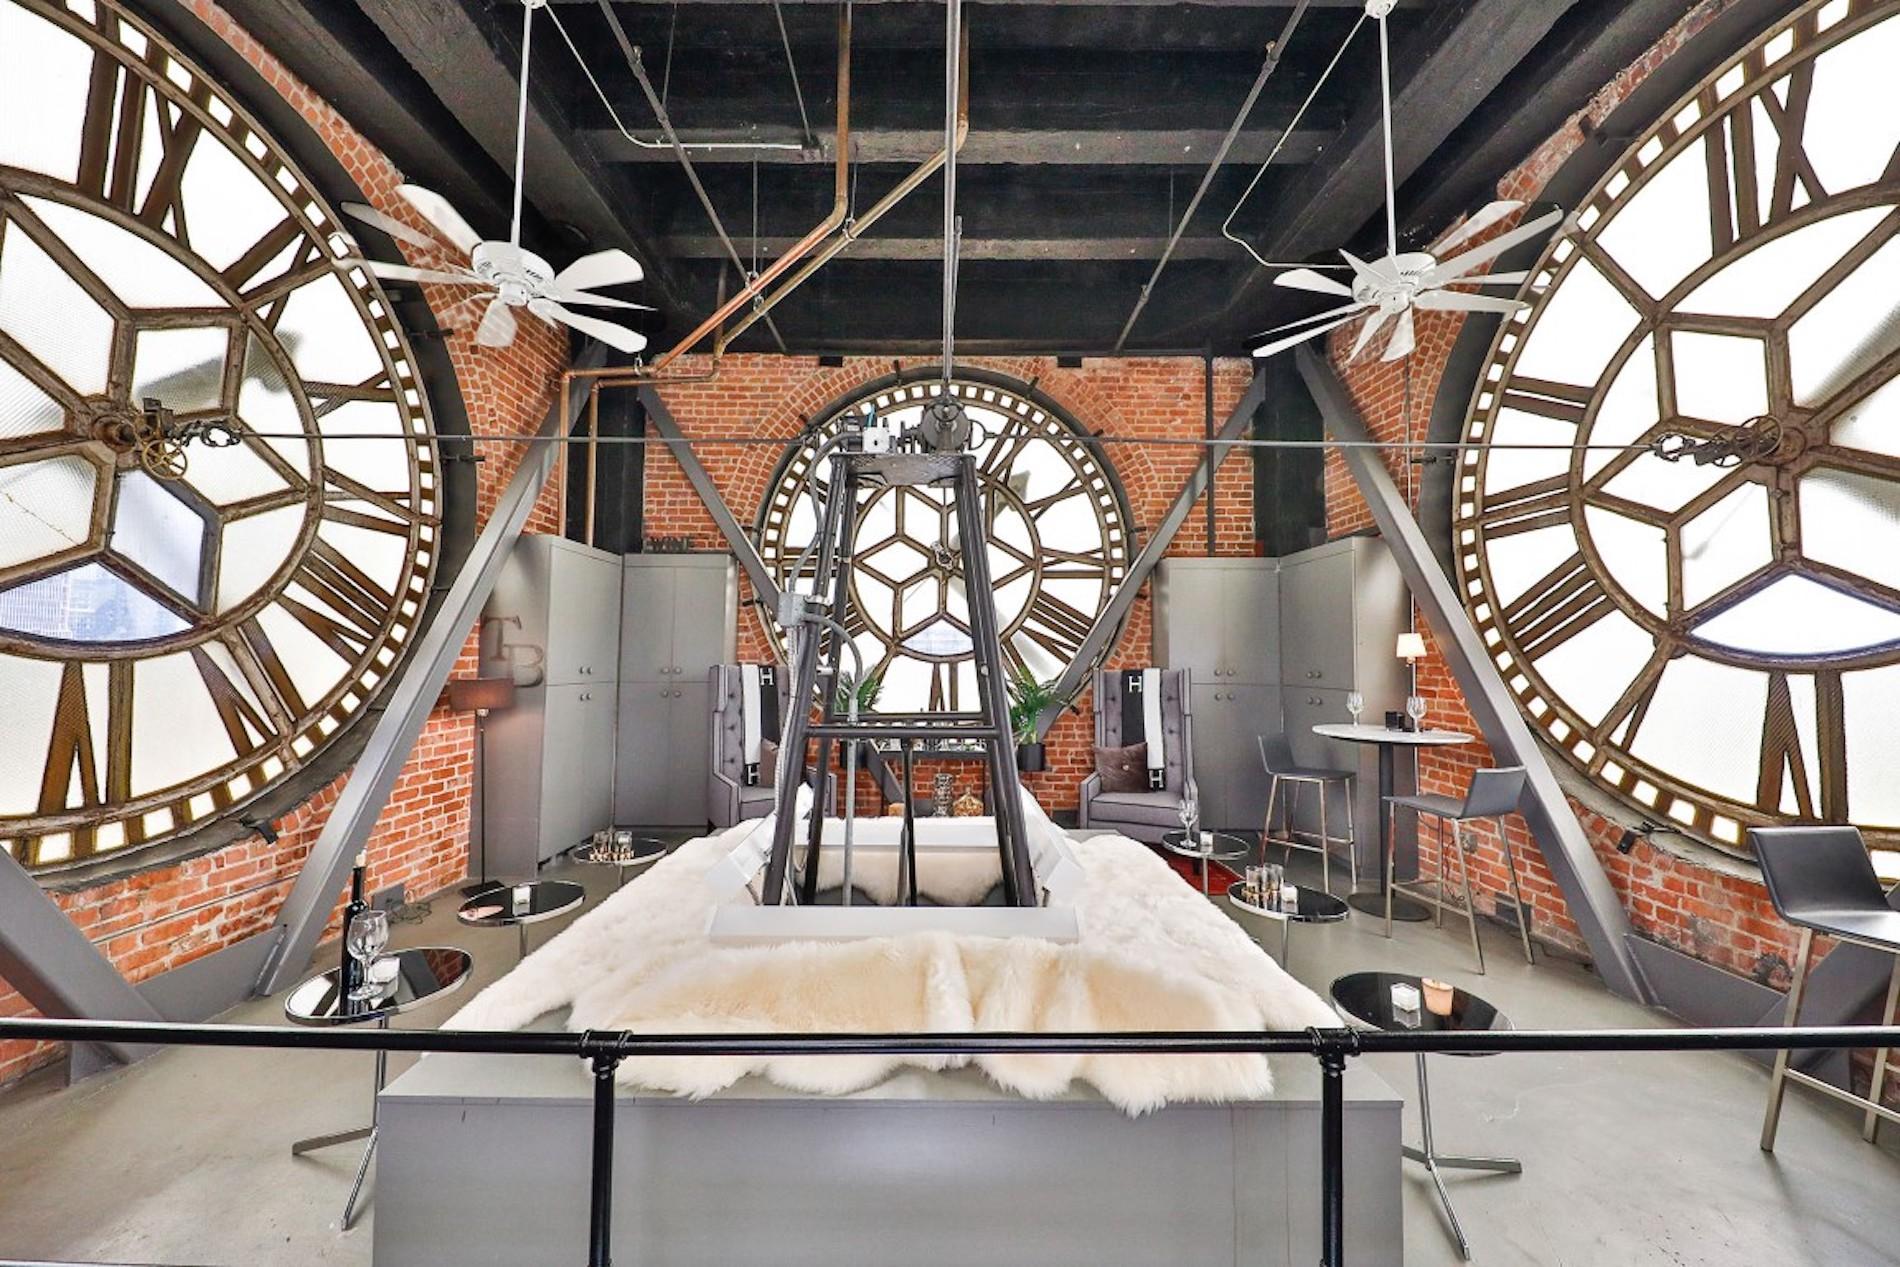 This Penthouse Sits Within a Historic San Francisco Clock Tower